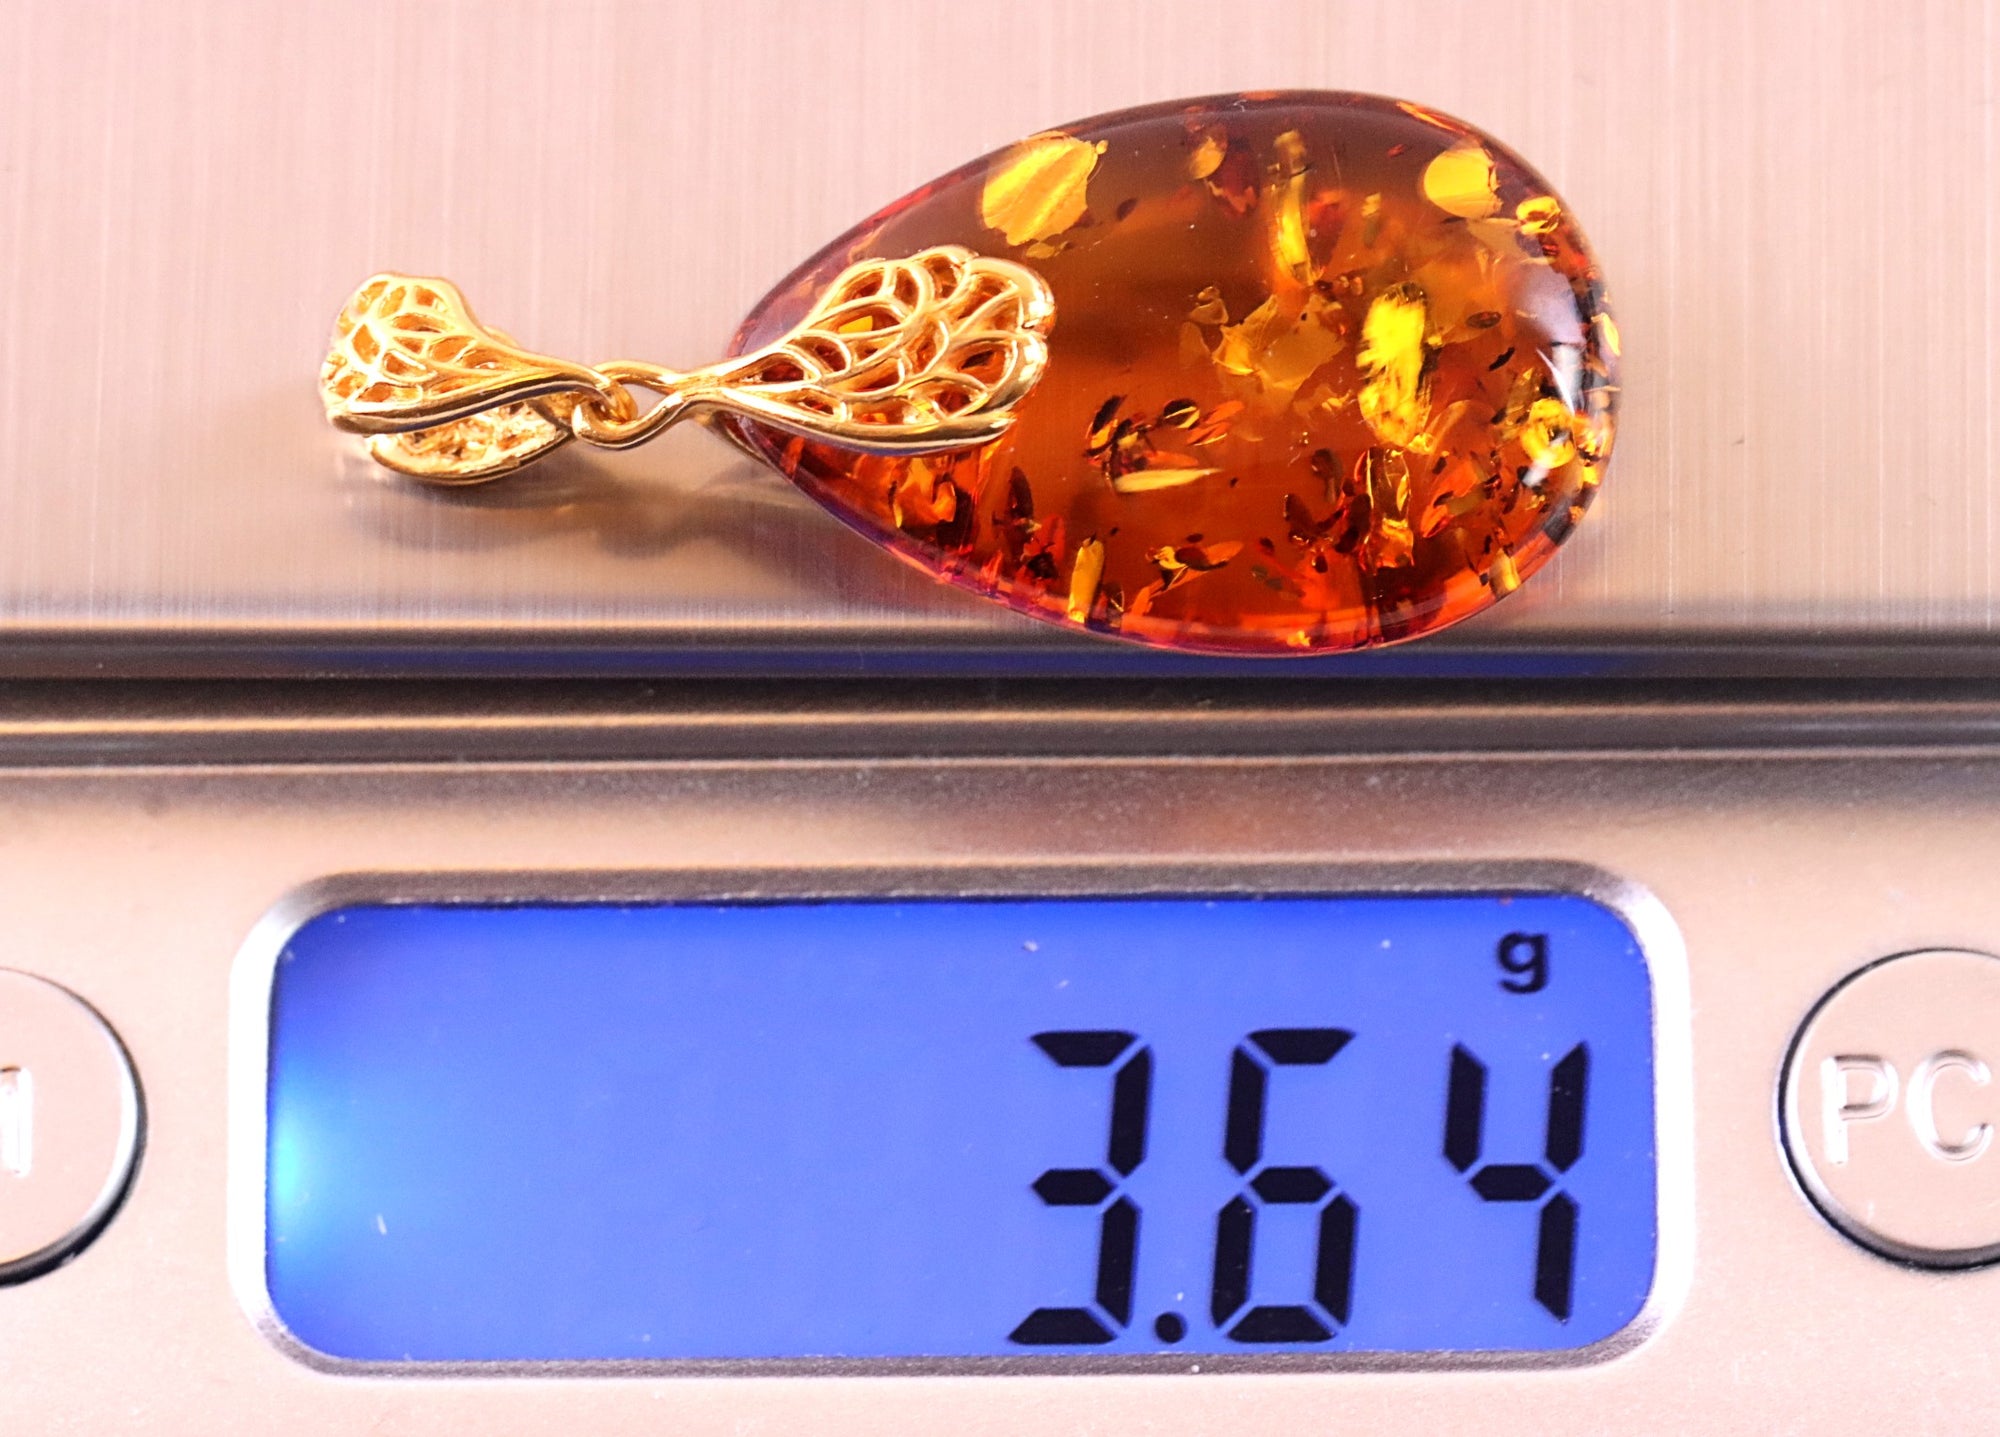 Special Offer 925 Gold Plated Silver Amber Gemstone Pendant Only One Available